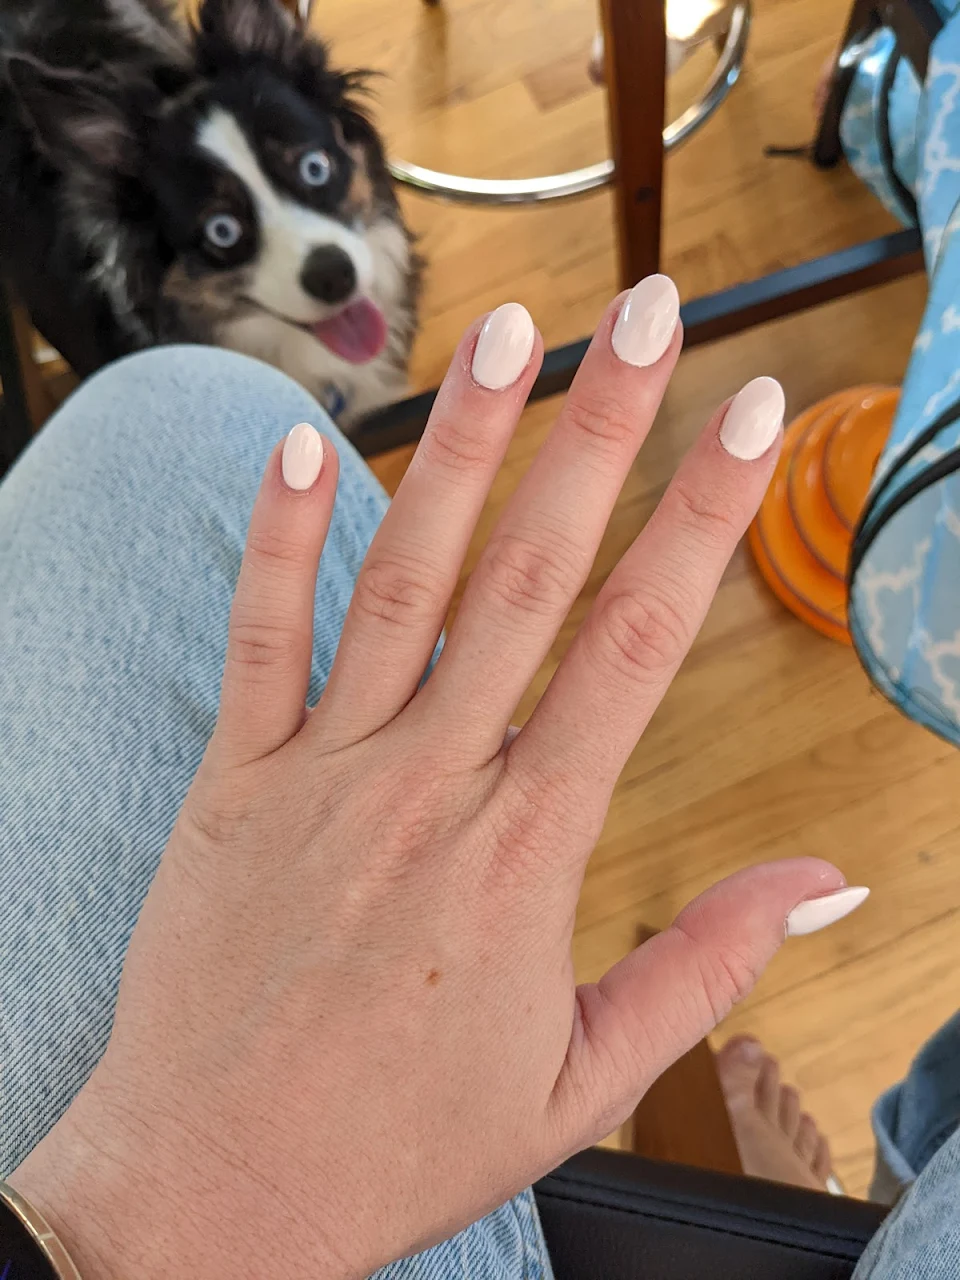 This pup is loving the nails!